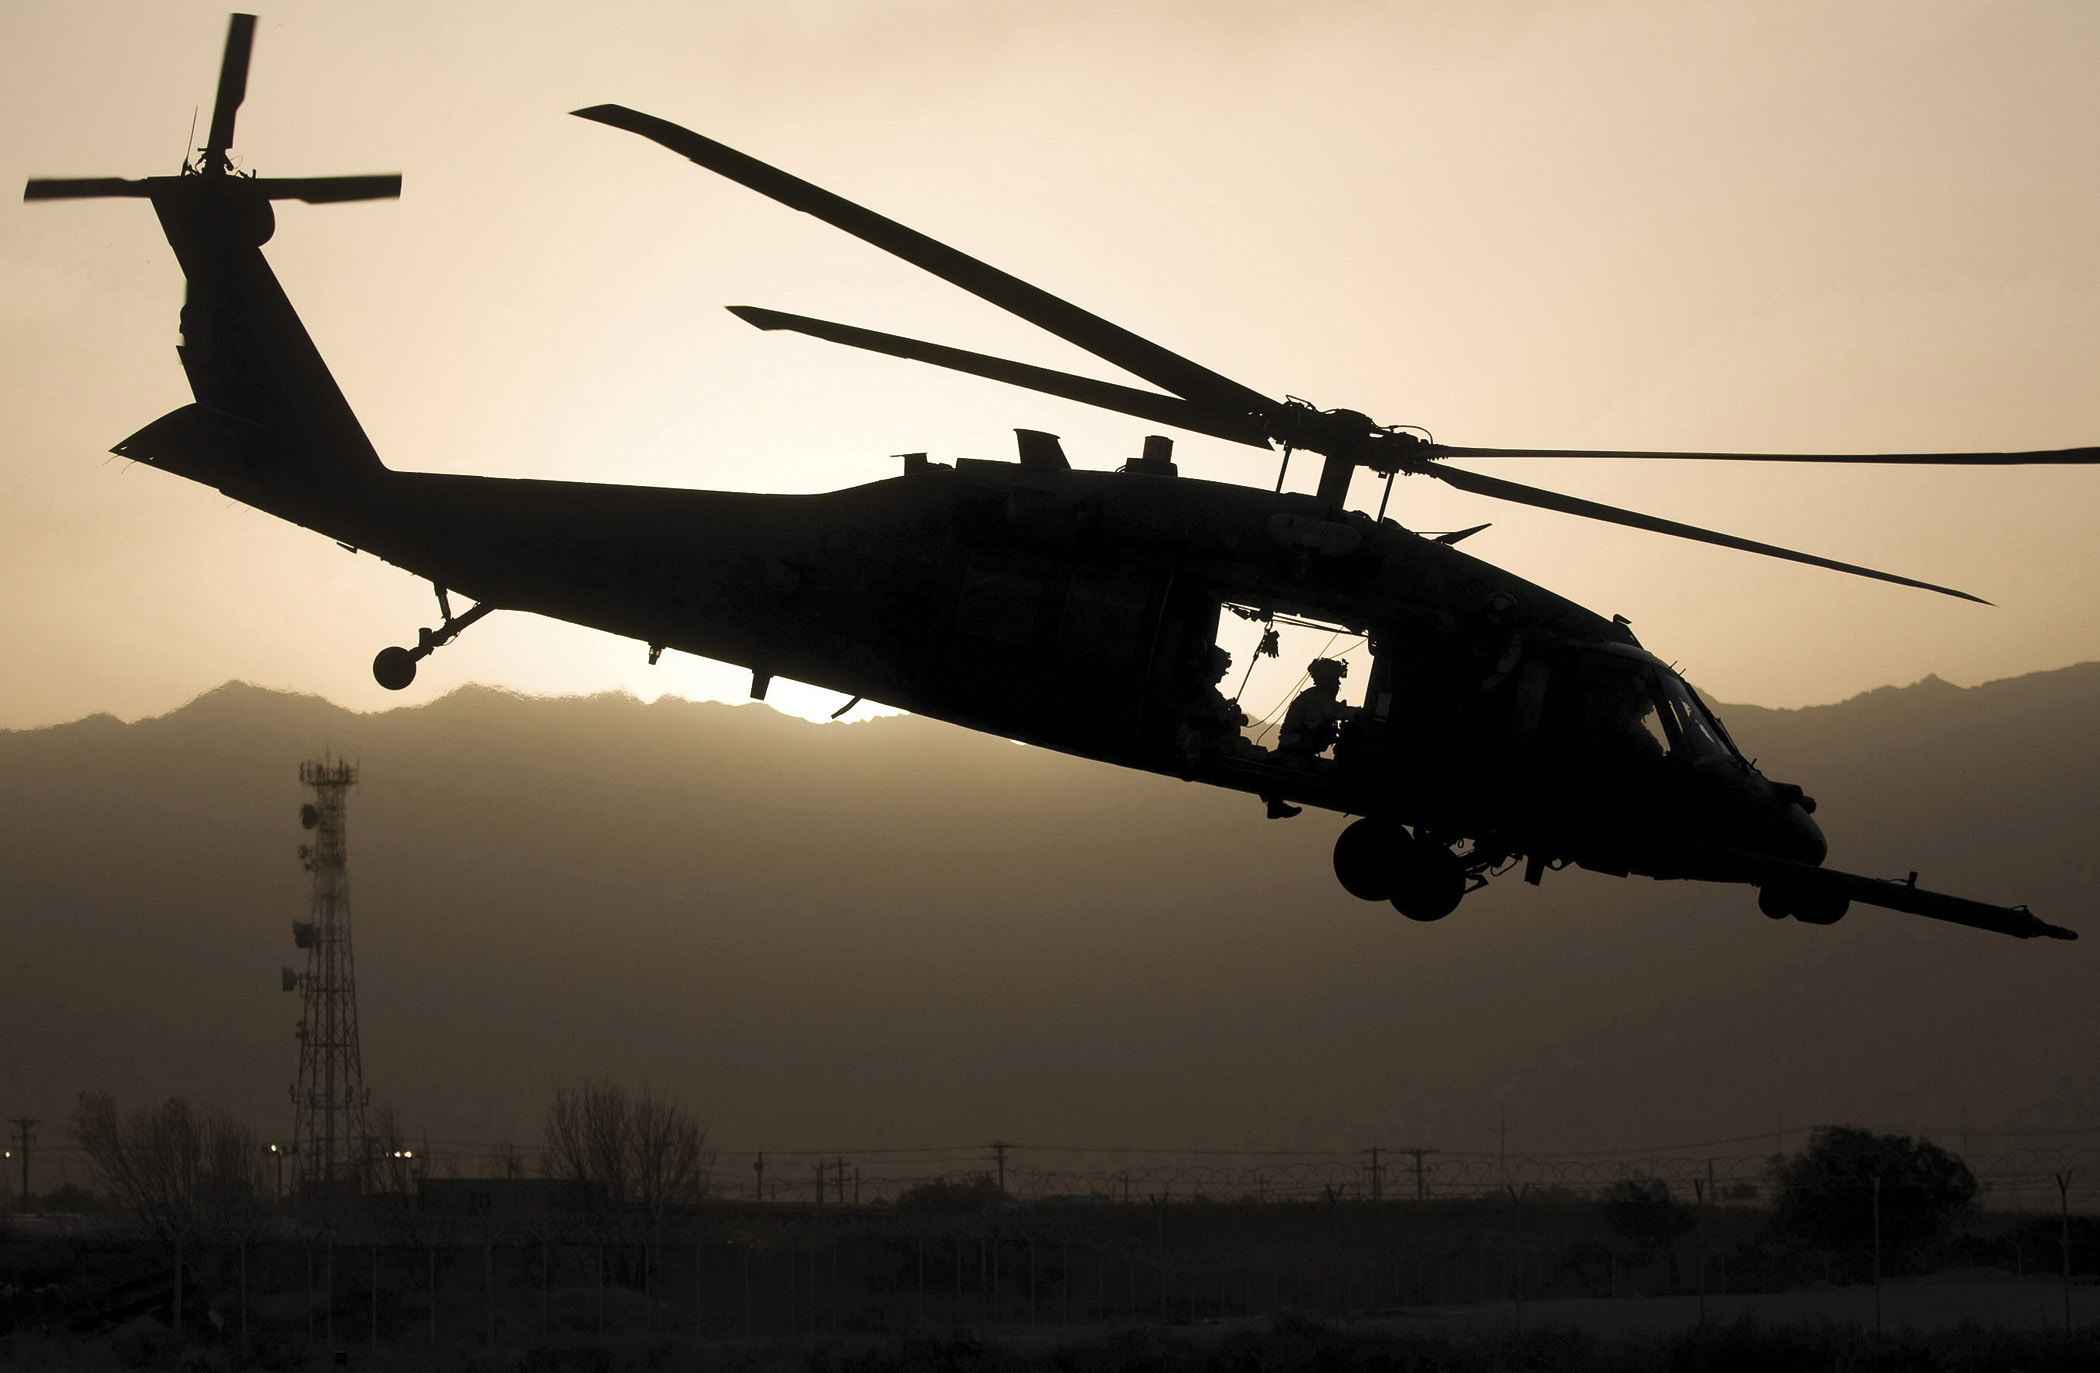 High Resolution Wallpaper | Sikorsky HH-60 Pave Hawk 2100x1373 px